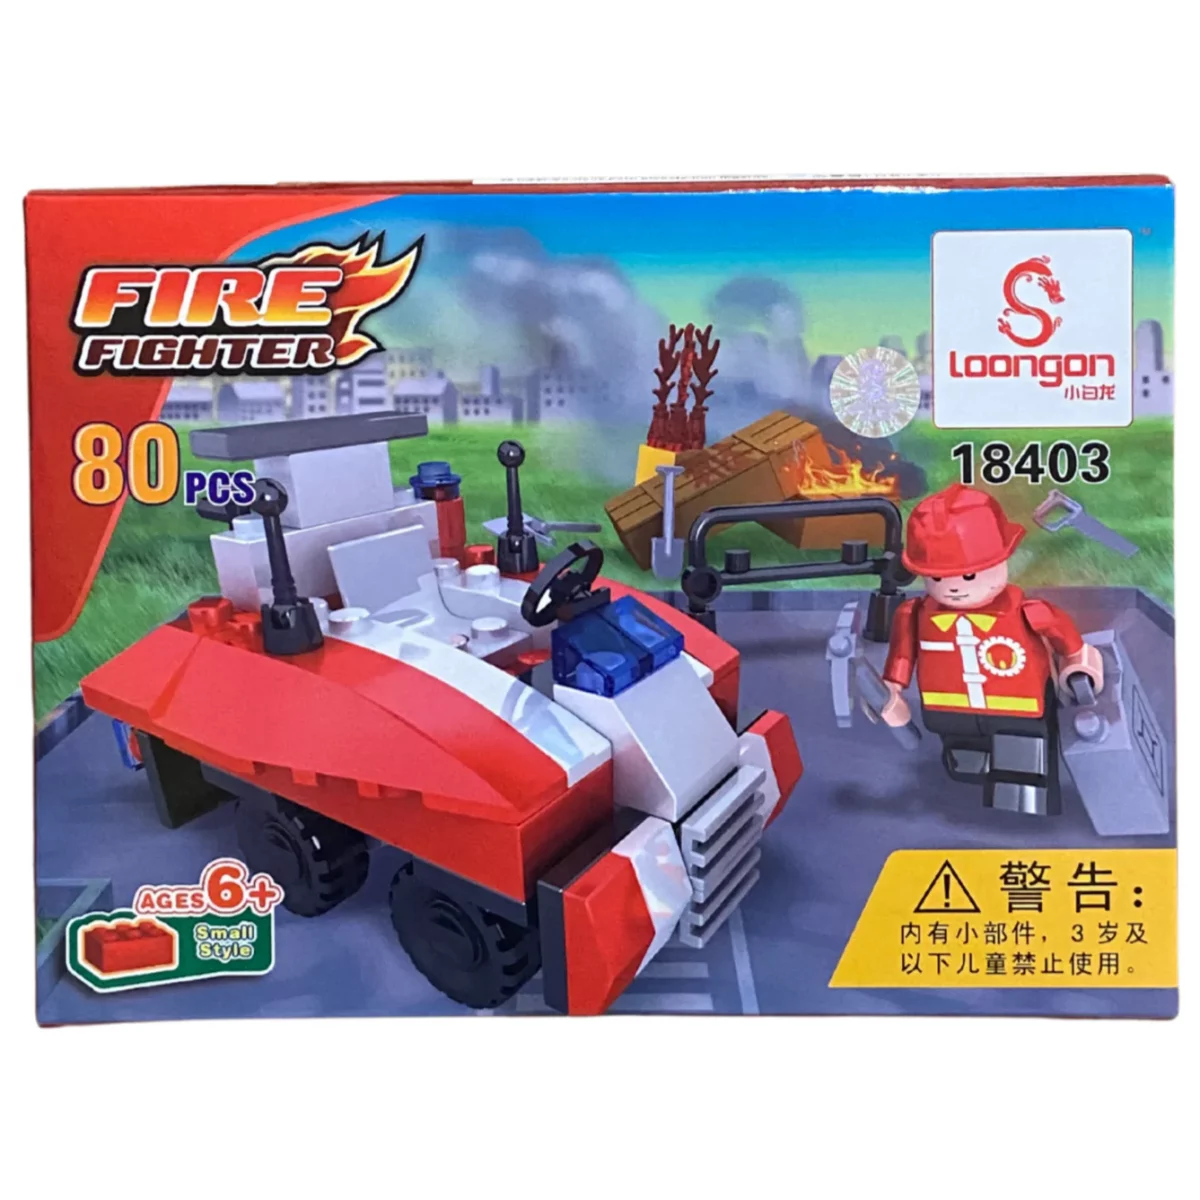 Loongon: Fire Fighter / 80 Pieces / Building Set